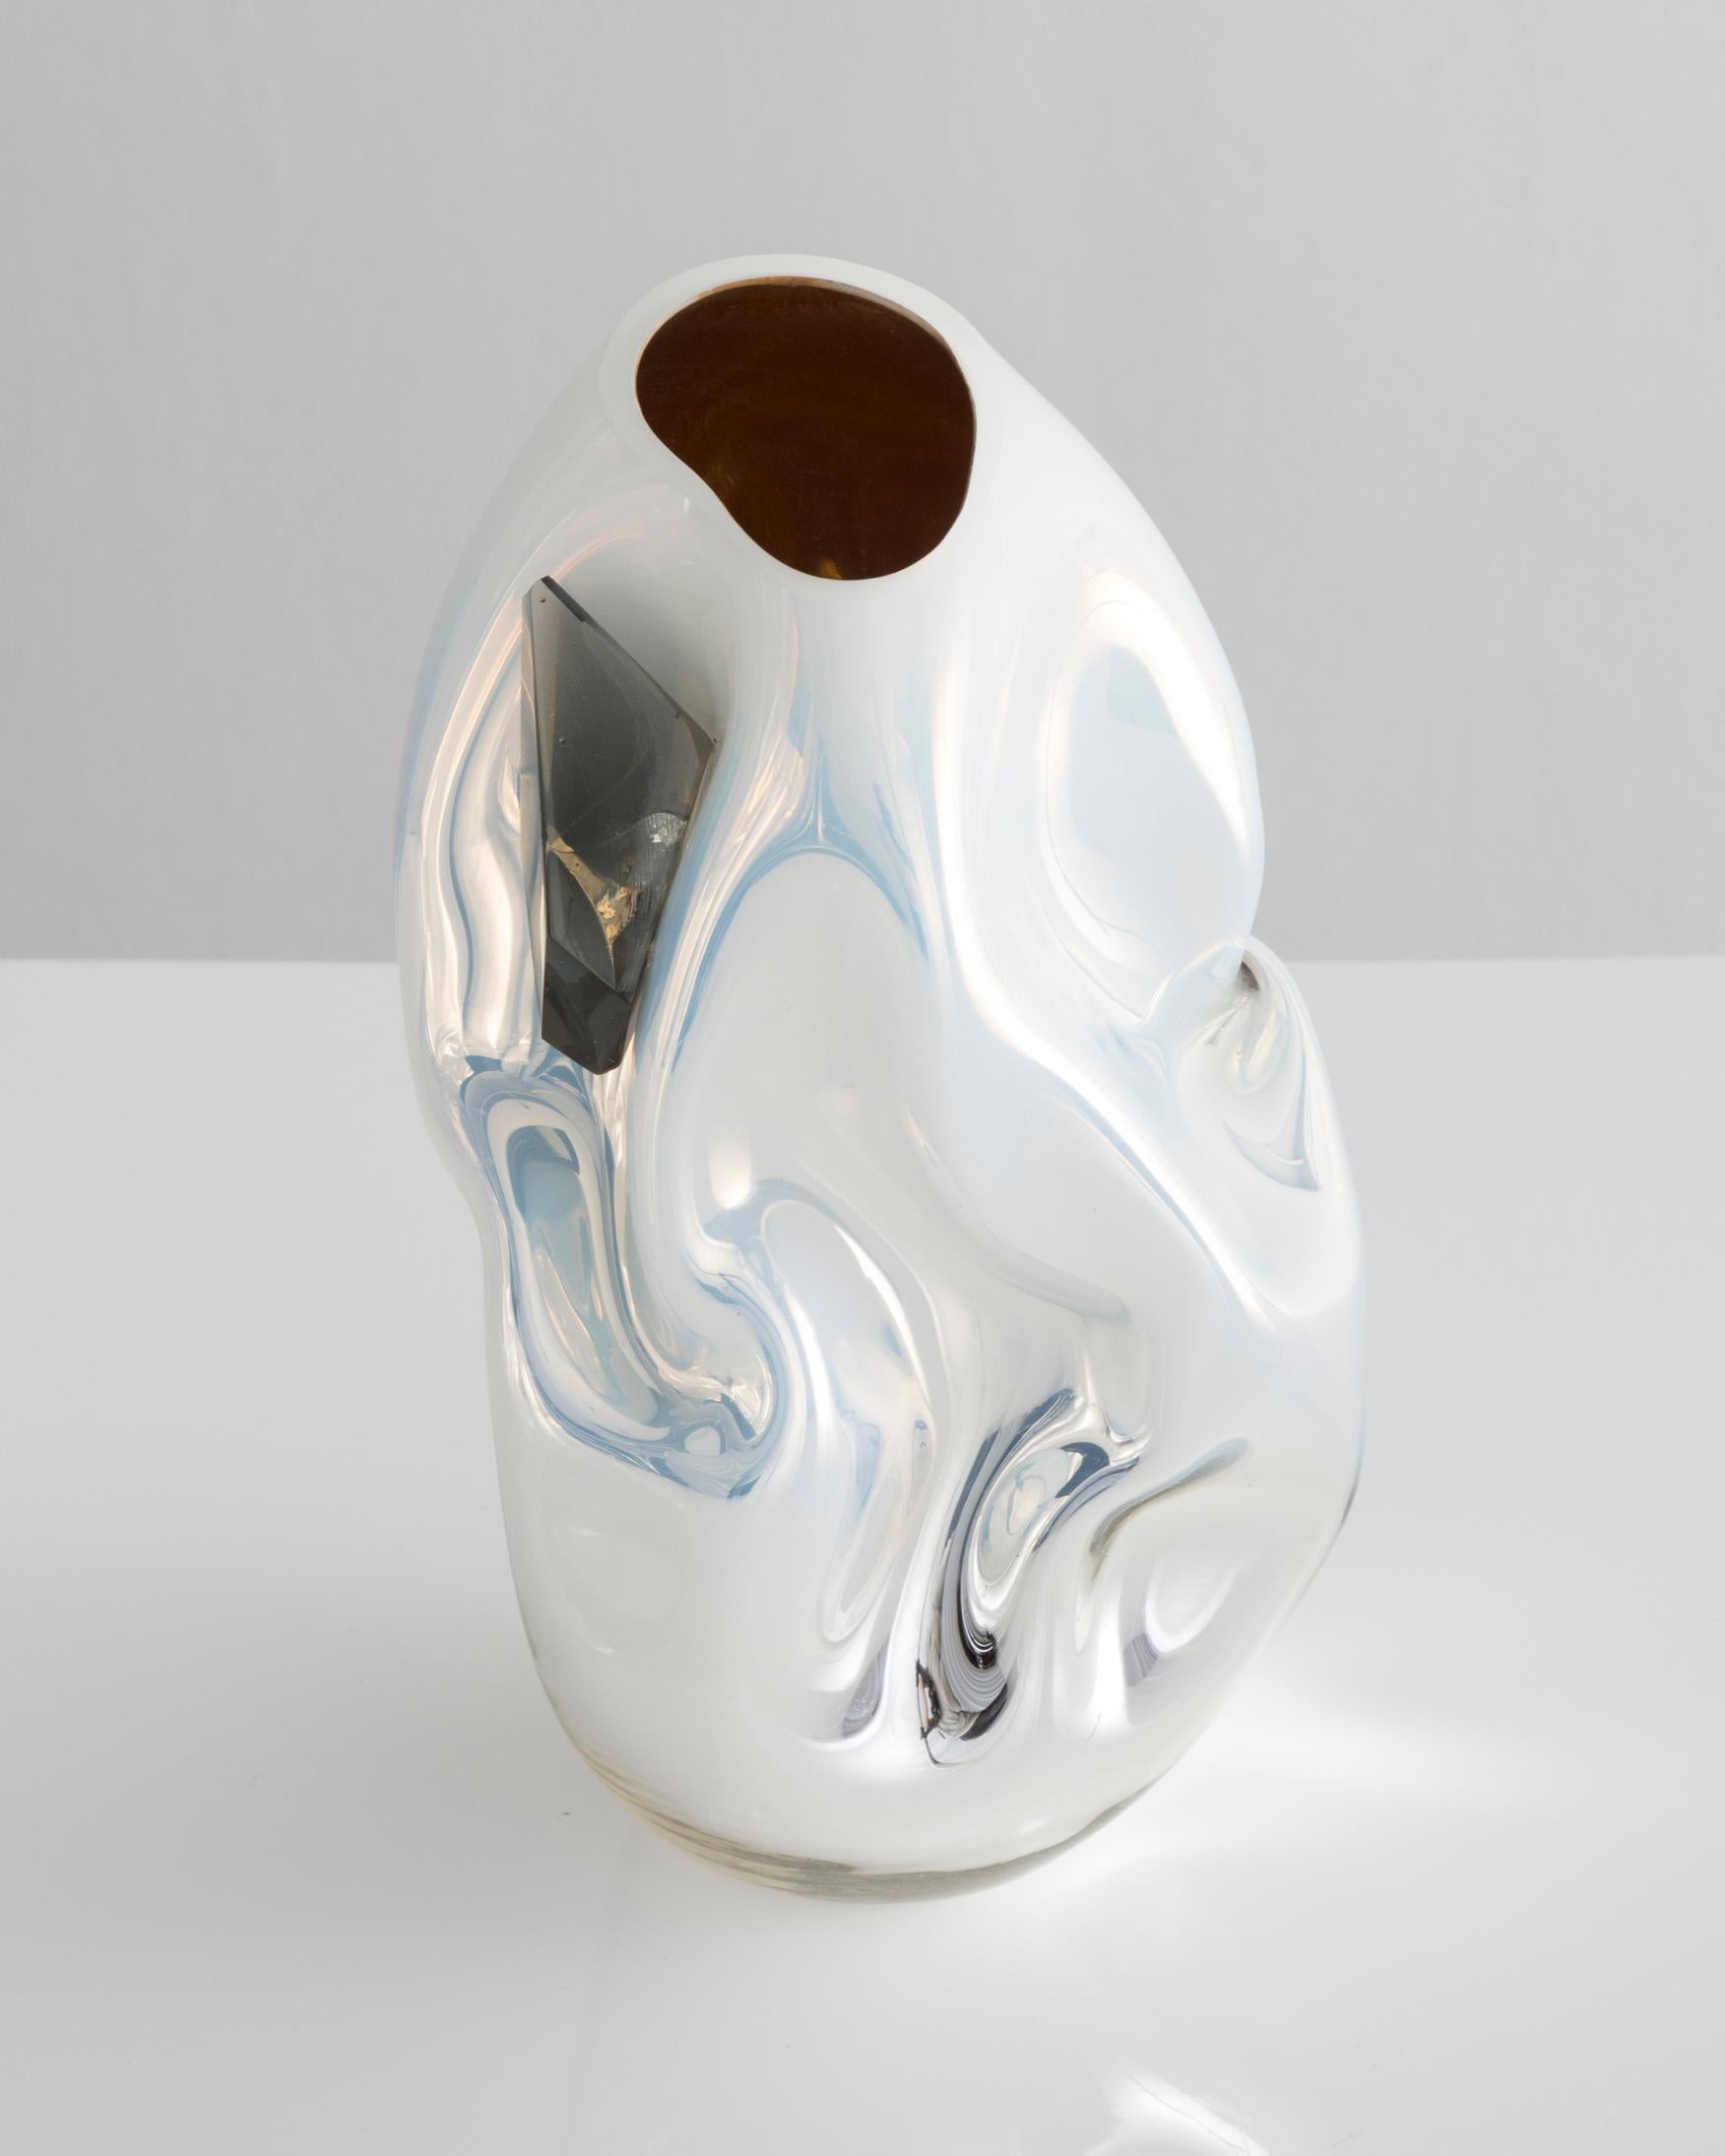 Unique petite crumpled sculptural vessel in silver and white mirrorized hand blown glass with applied glass crystal. Designed and made by Jeff Zimmerman, USA, 2017.

Limited number available. Please note that each item may differ slightly in color